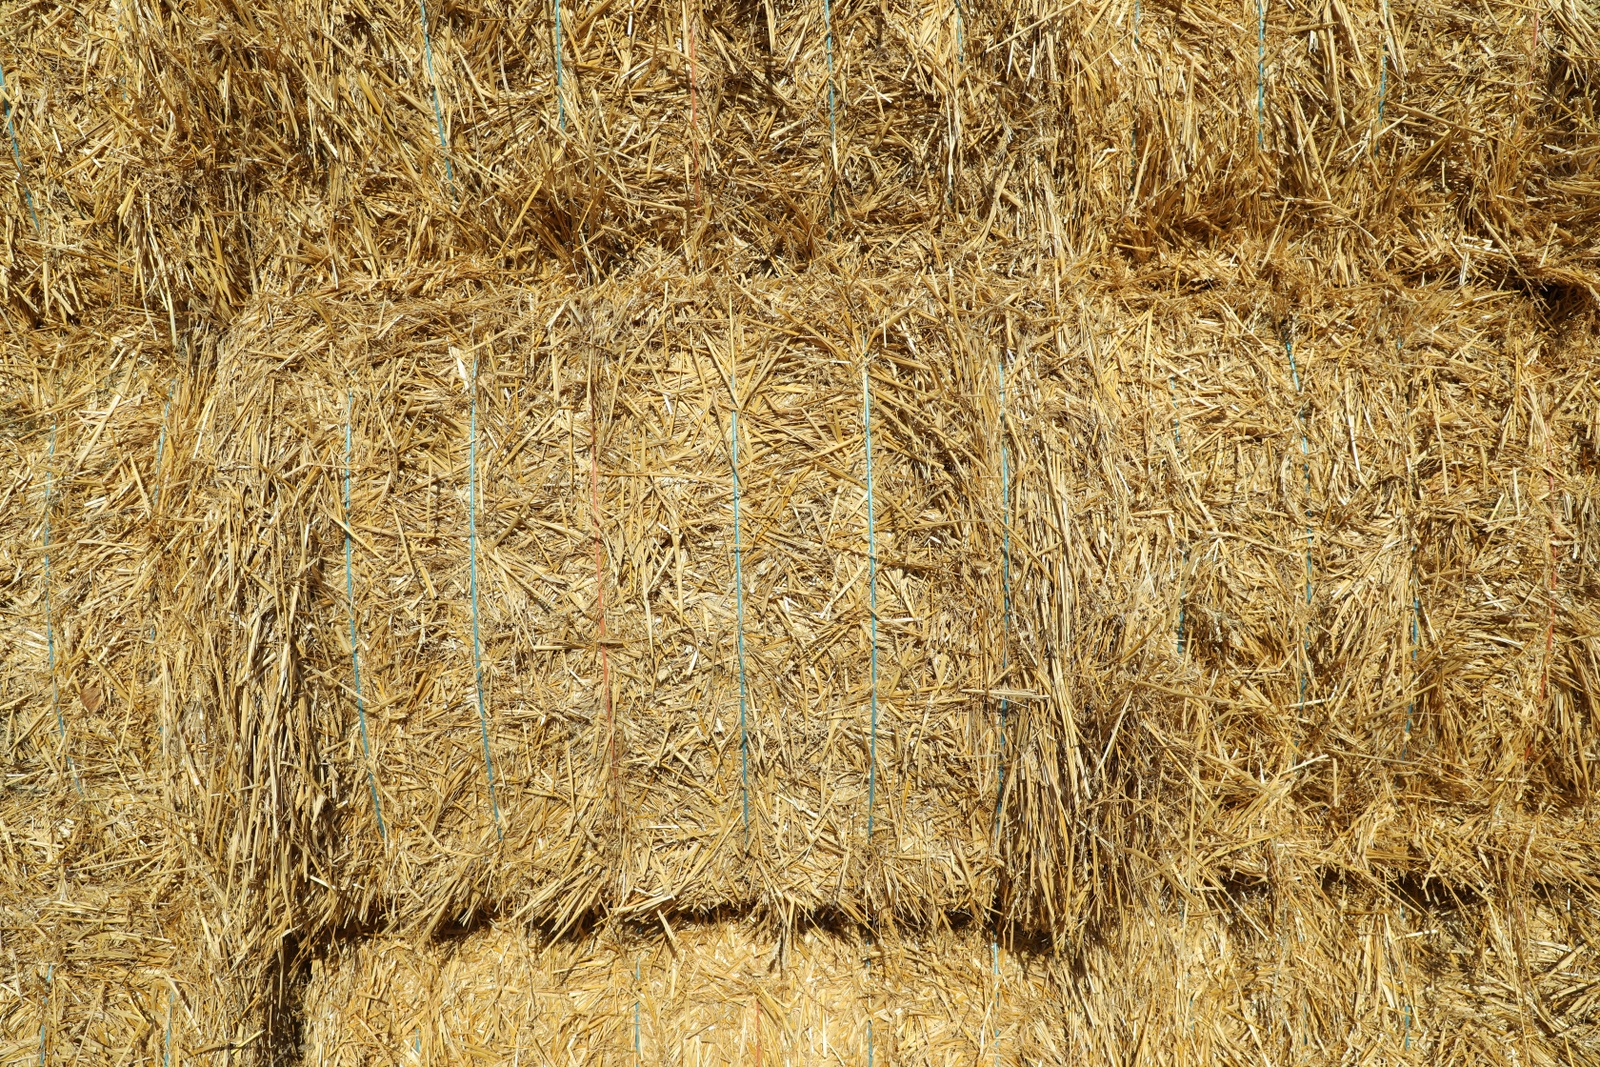 Photo of Many hay bales as background, closeup view